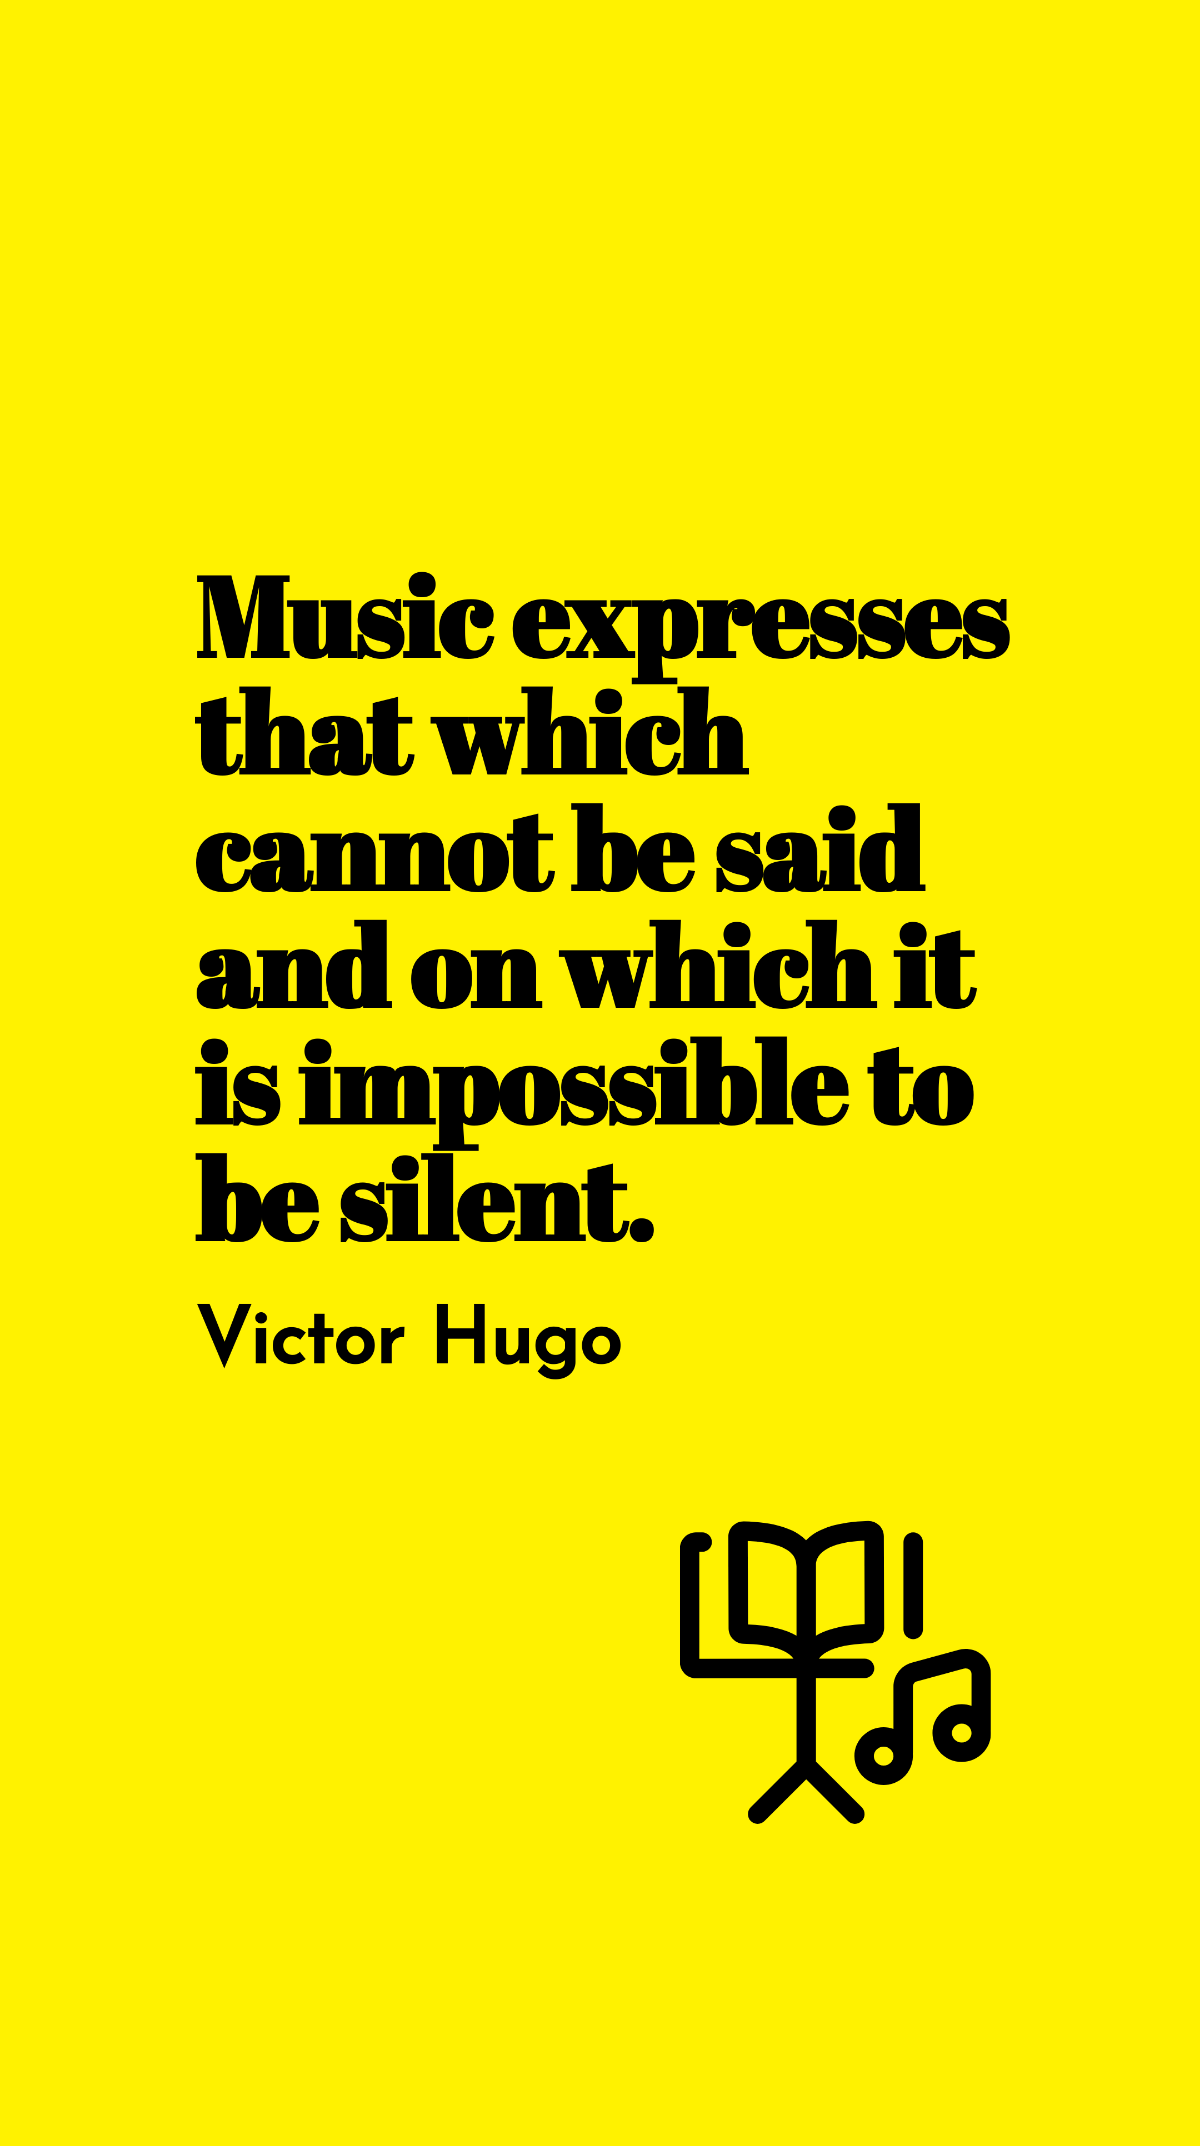 Victor Hugo - Music expresses that which cannot be said and on which it is impossible to be silent.